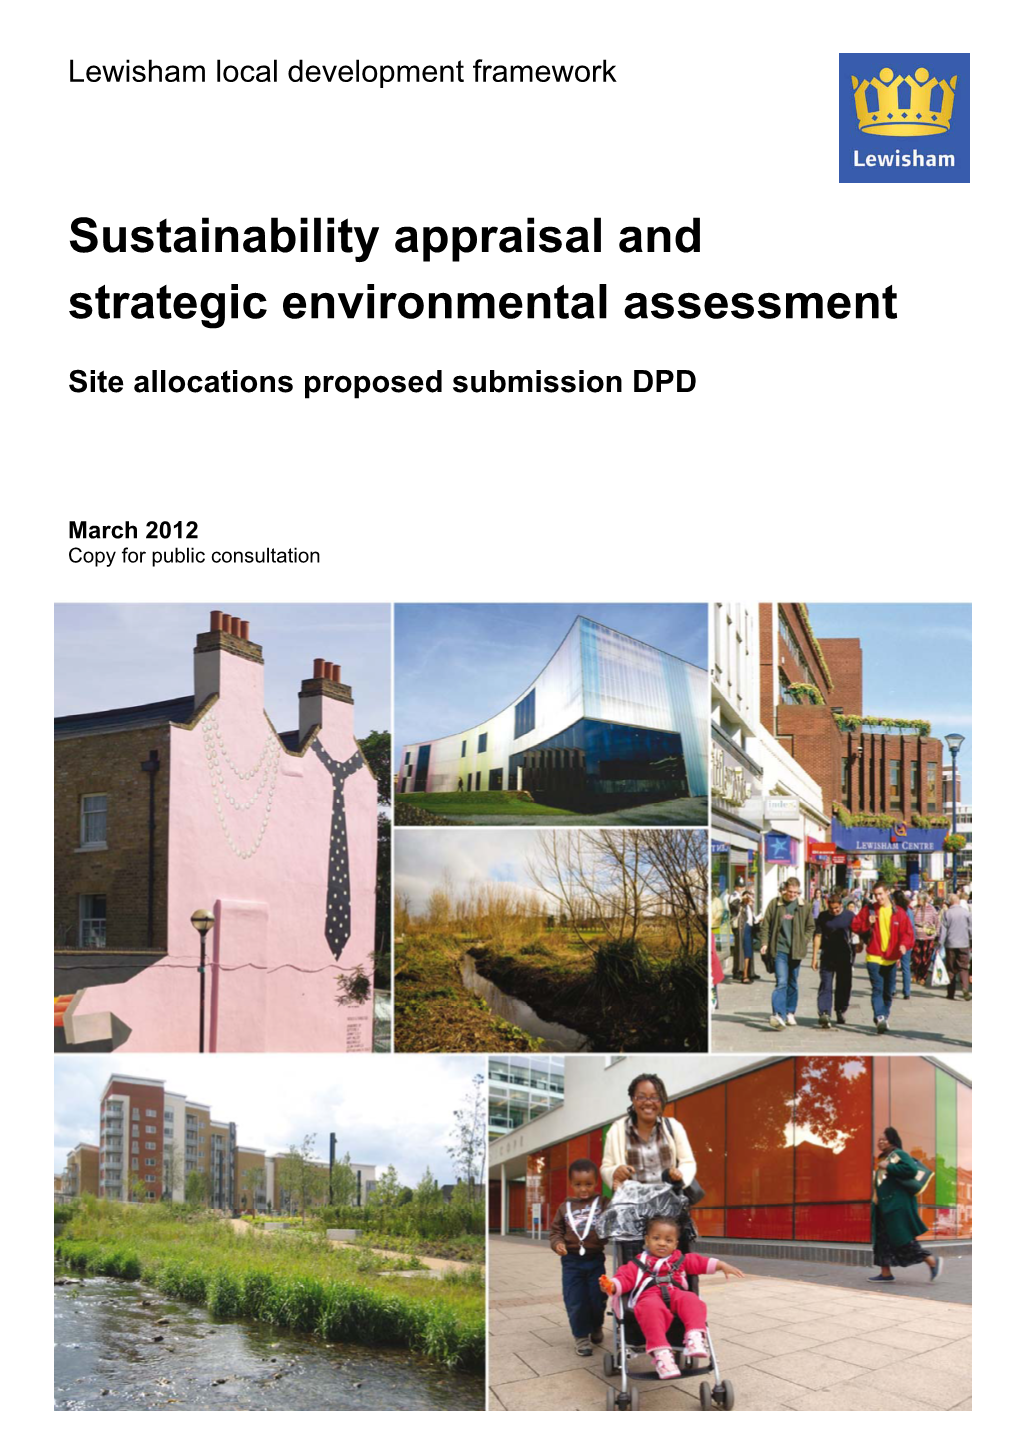 Sustainability Appraisal and Strategic Environmental Assessment